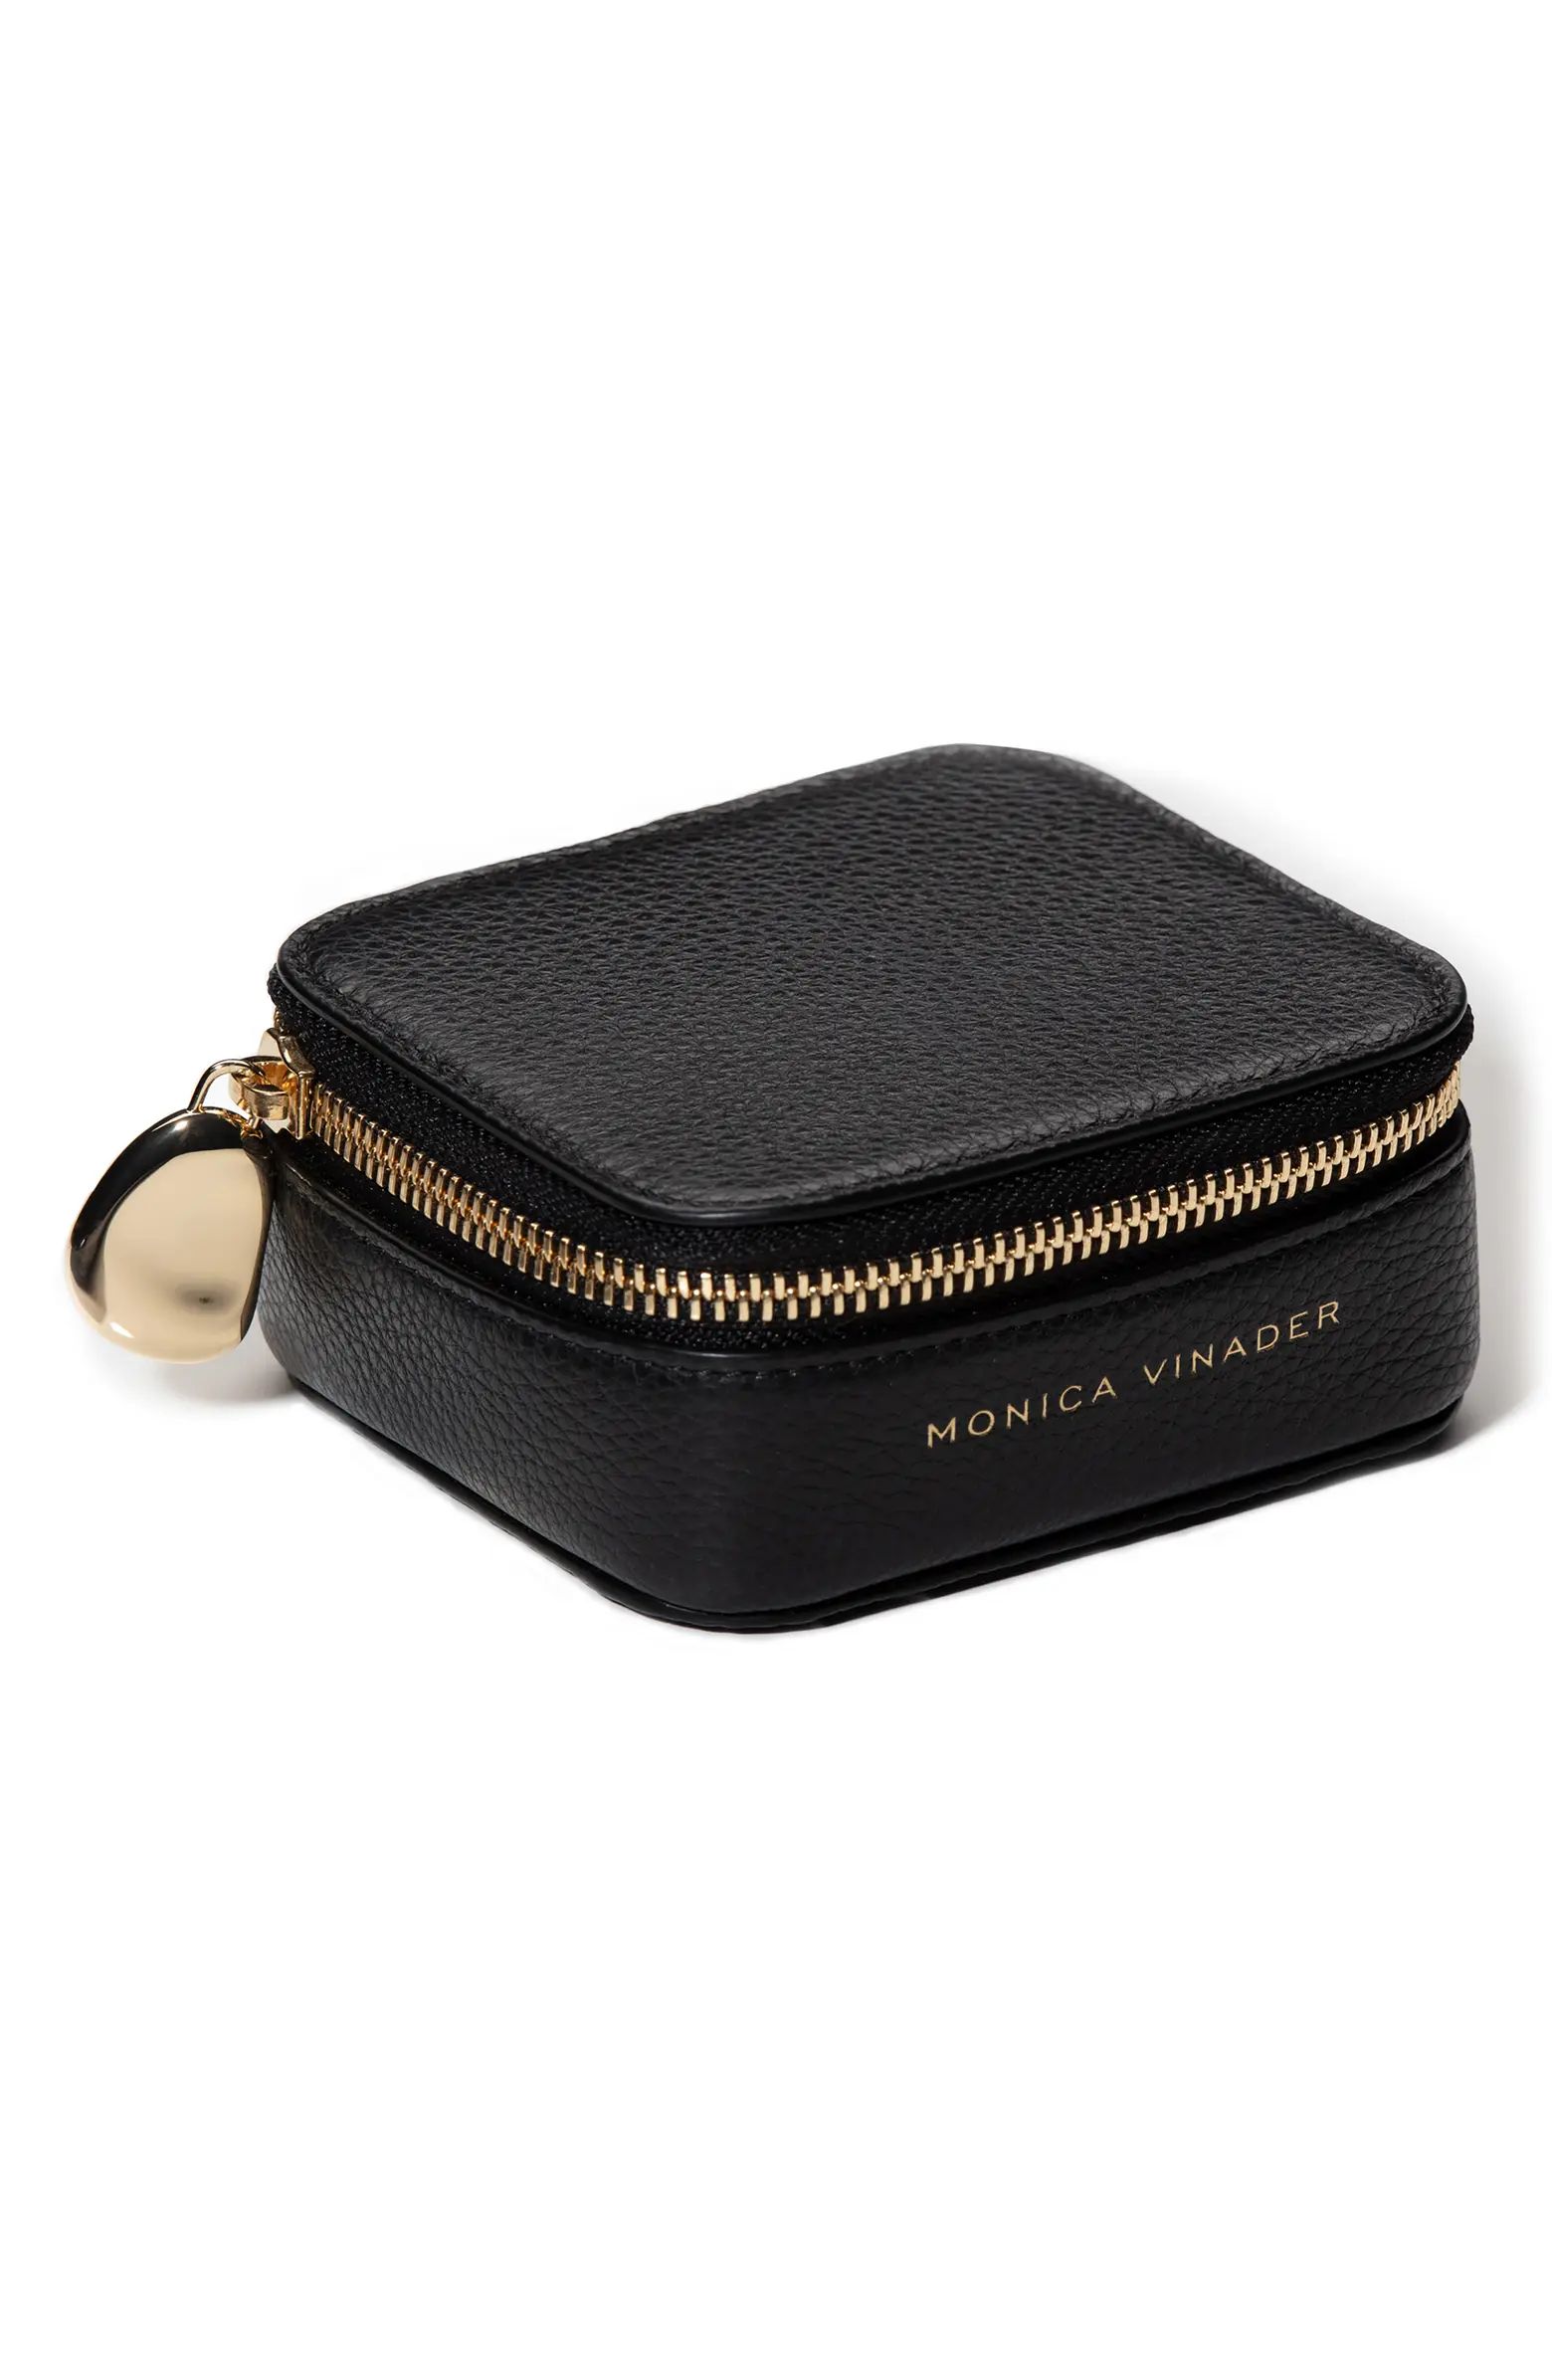 Monica Vinader Personalized Leather Jewelry Box | Nordstrom | Nordstrom